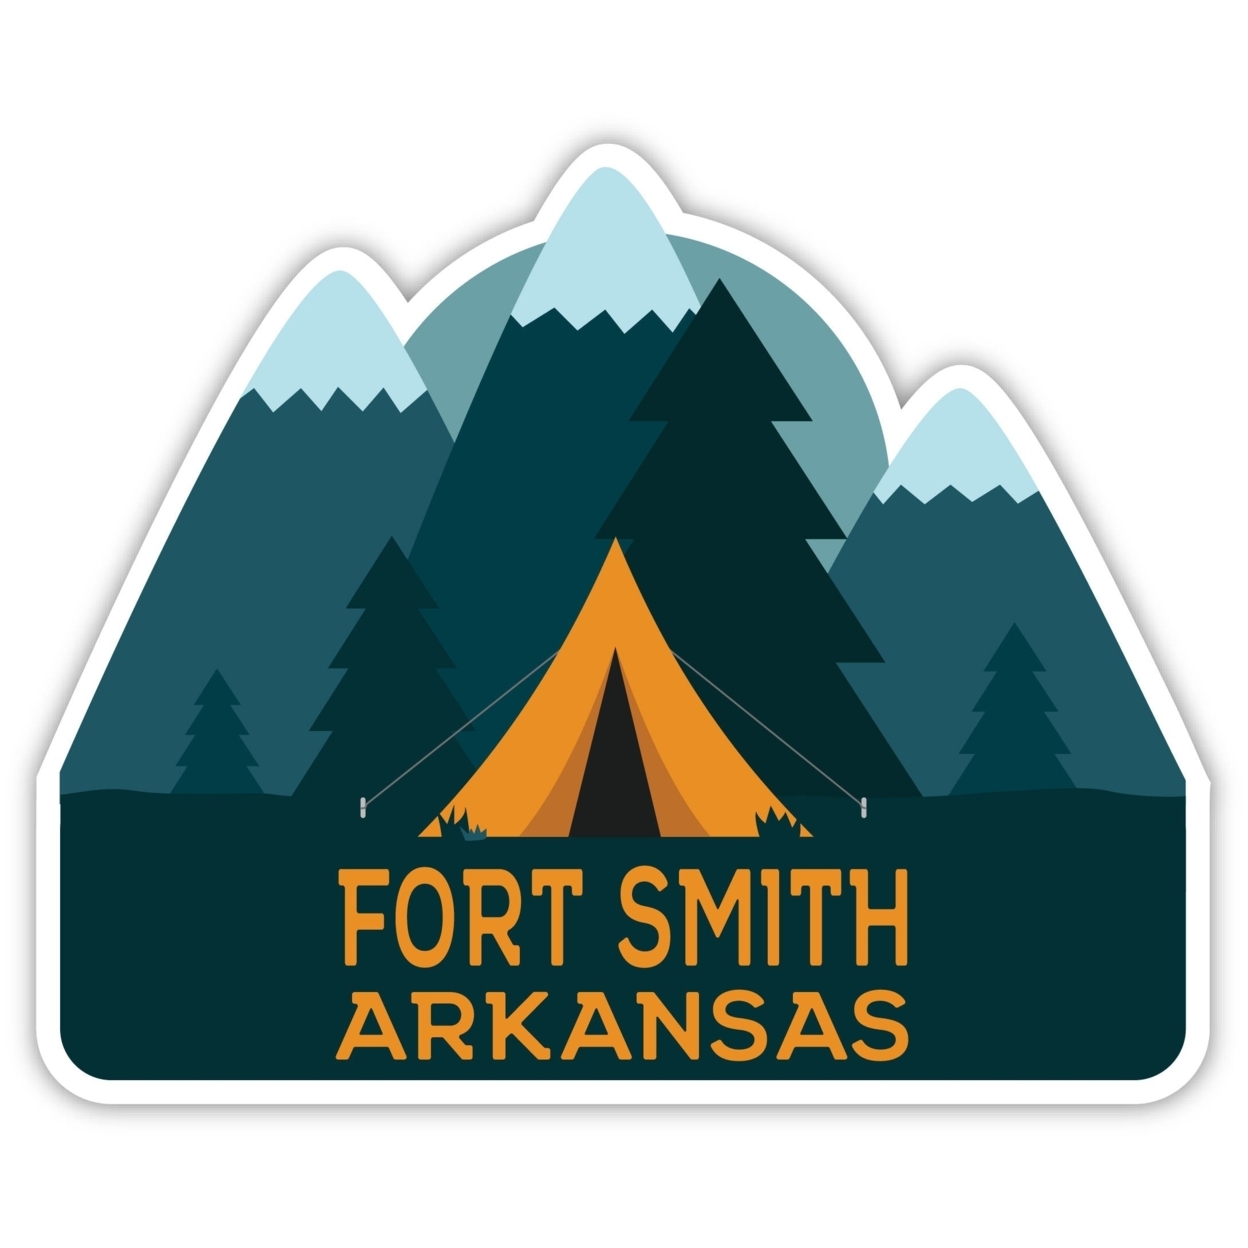 Fort Smith Arkansas Souvenir Decorative Stickers (Choose Theme And Size) - 4-Pack, 10-Inch, Tent